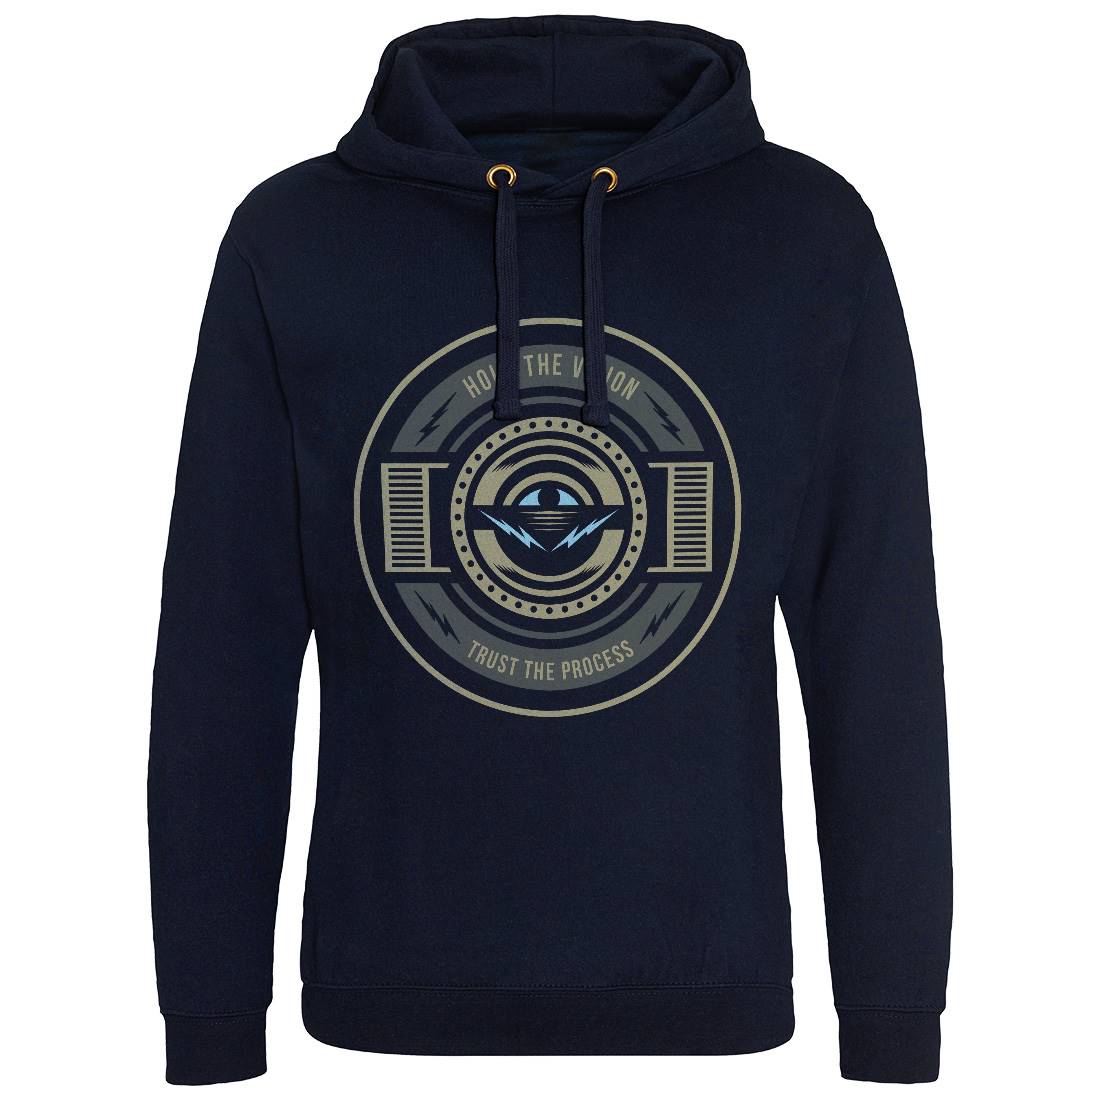 Hold The Vision Mens Hoodie Without Pocket Illuminati A331